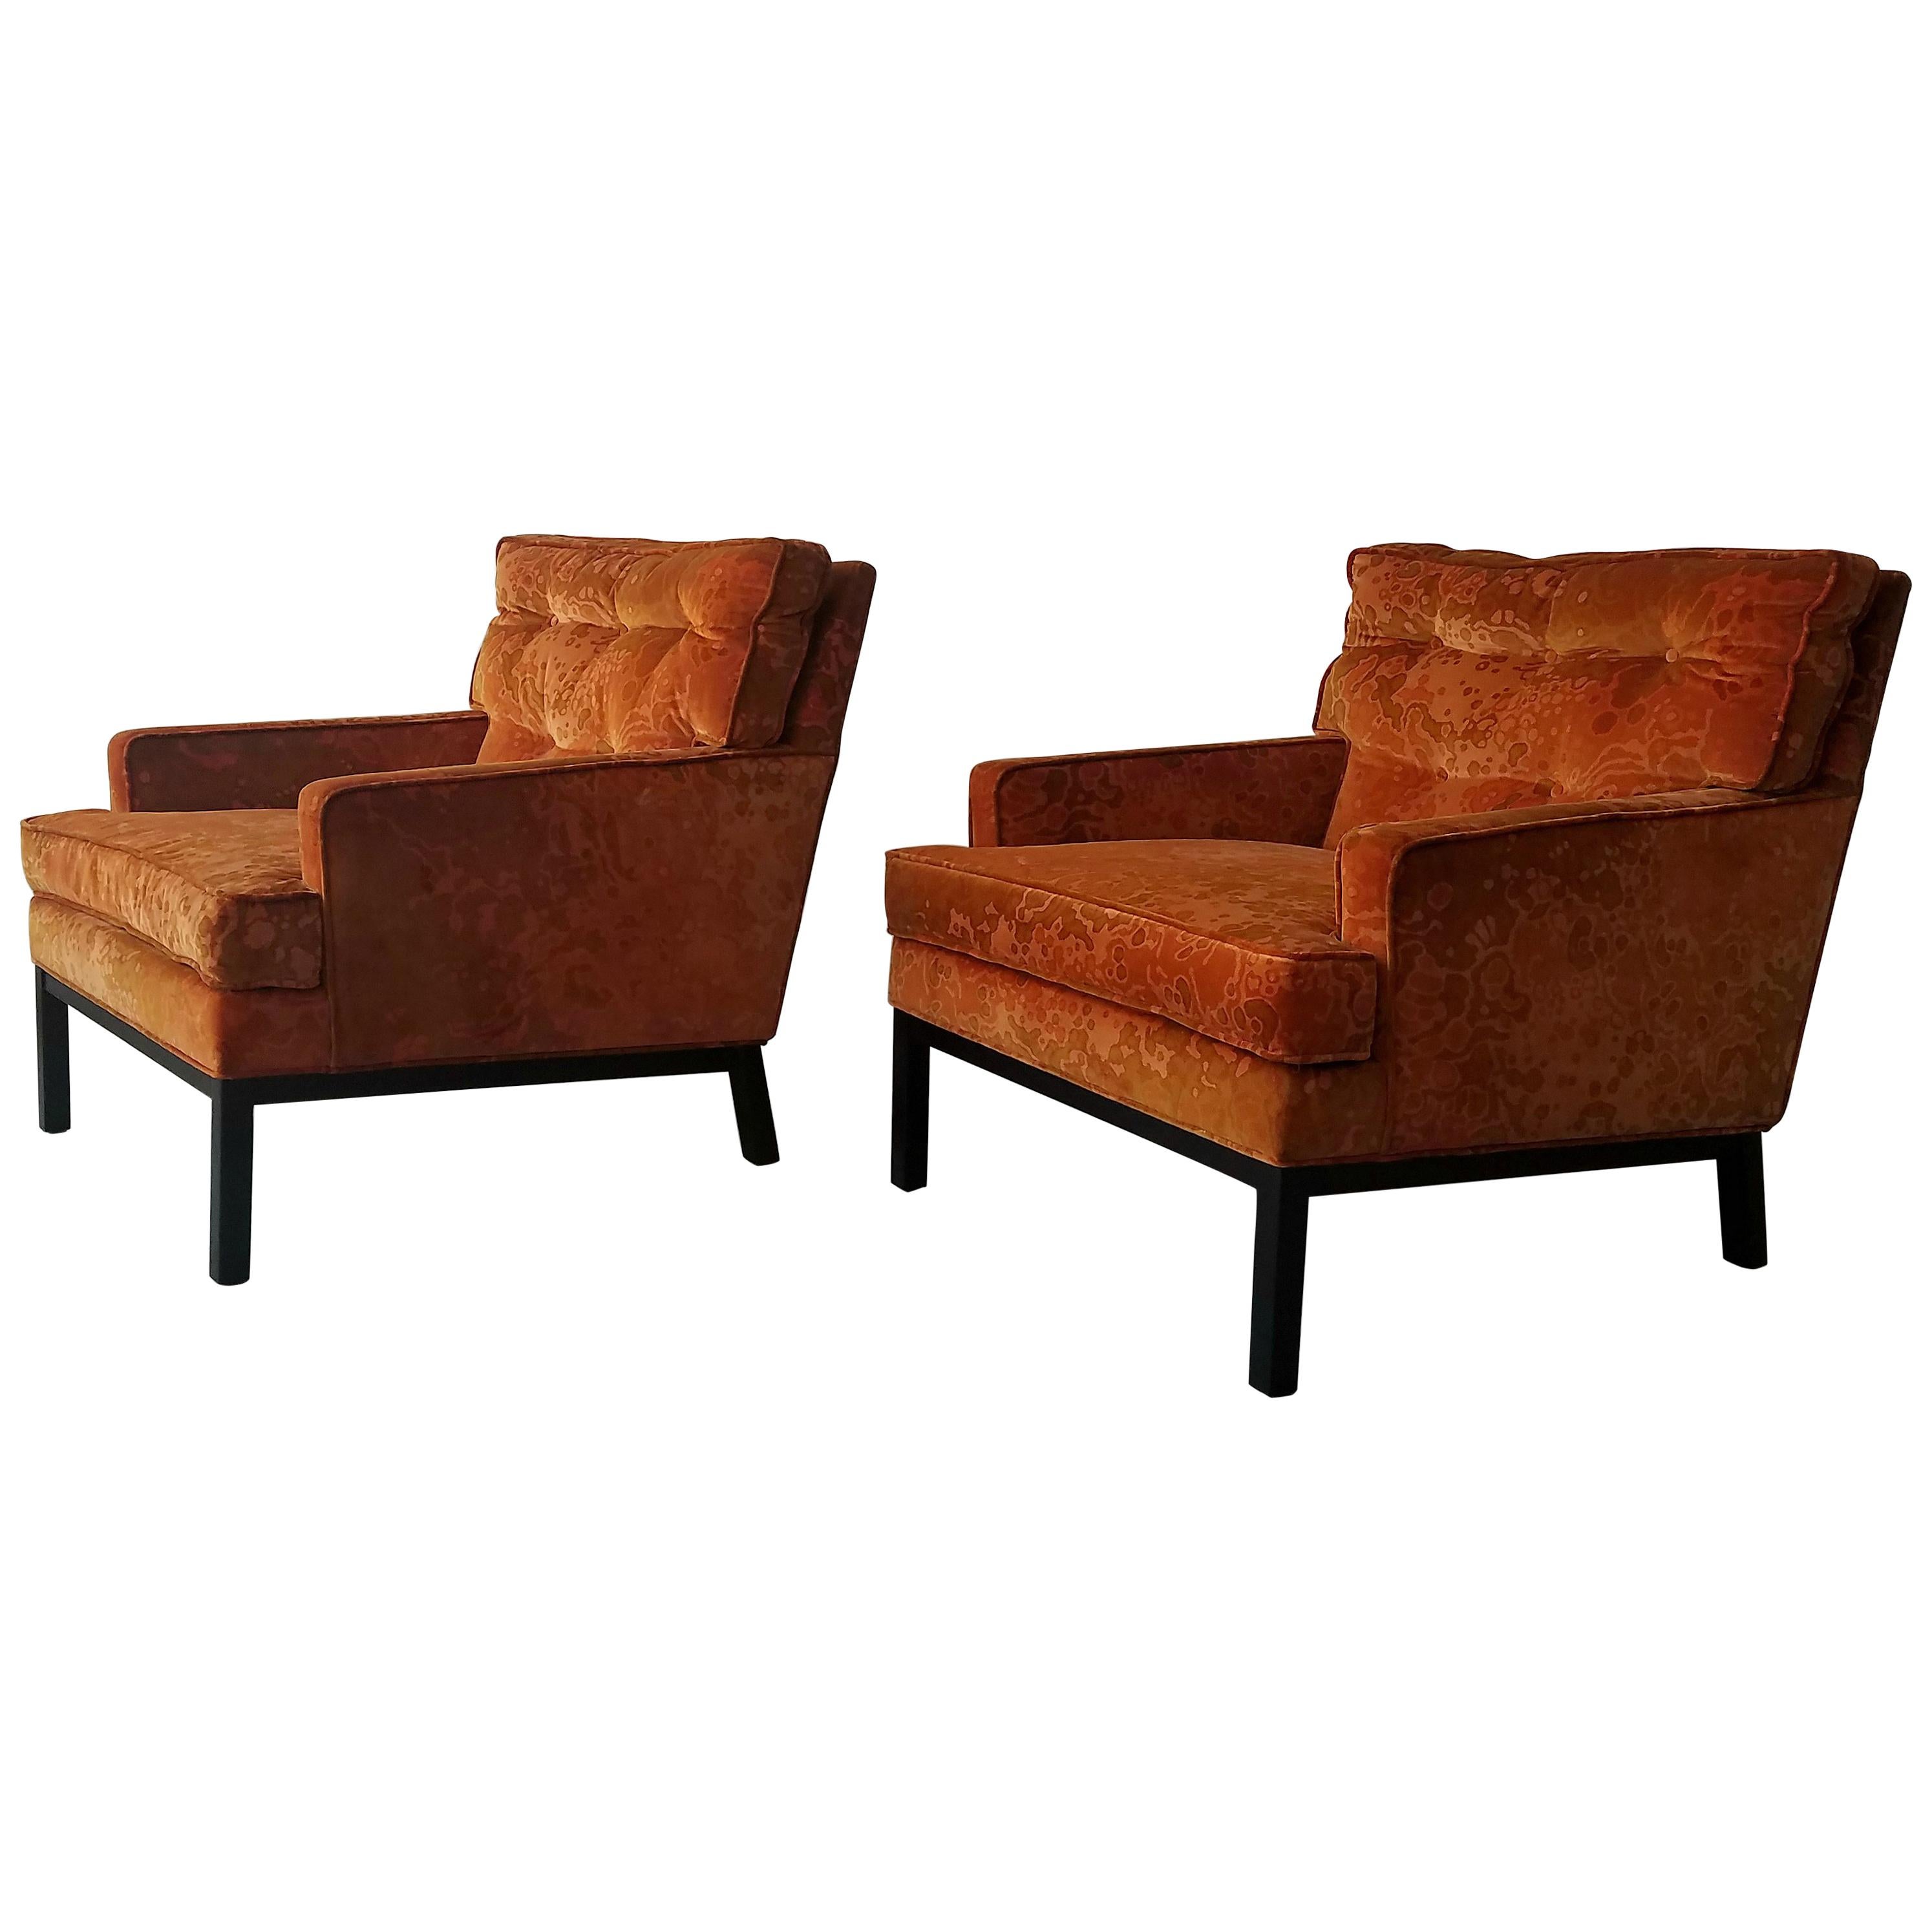 Pair of Midcentury Lounge Chairs by Harvey Probber in Jack Lenor Larsen Fabric